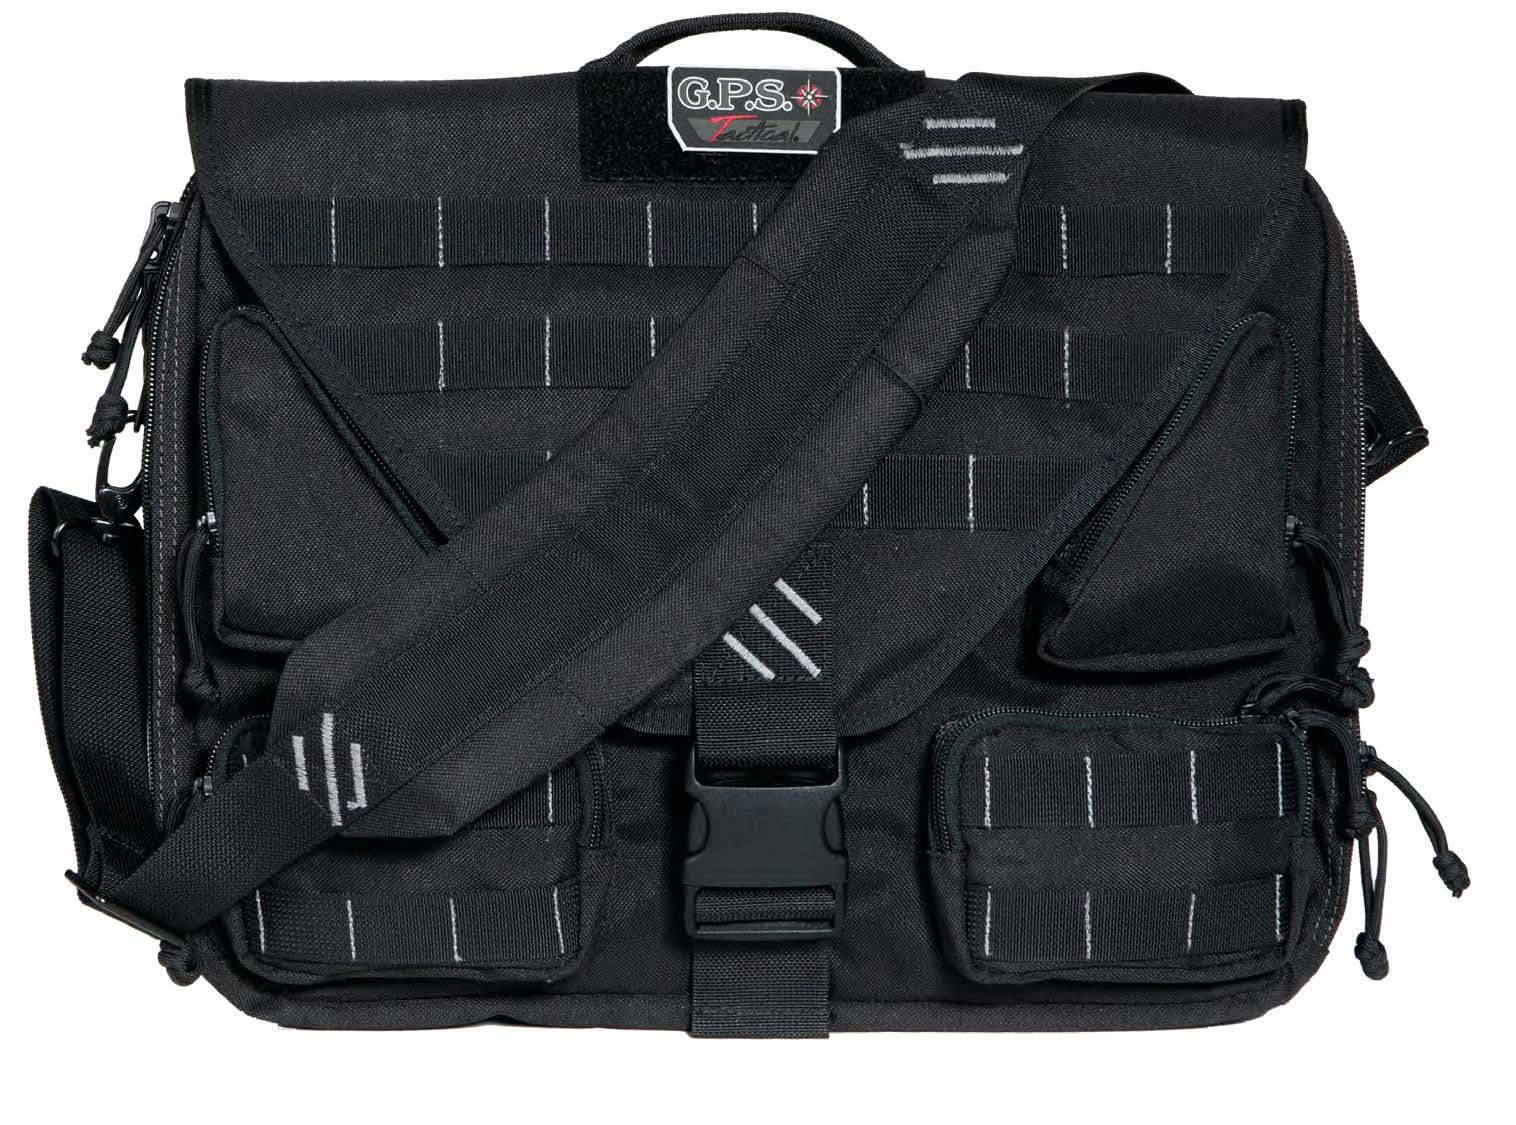 G Outdoors (G.P.S.) Tactical Operations Brief Case, Black